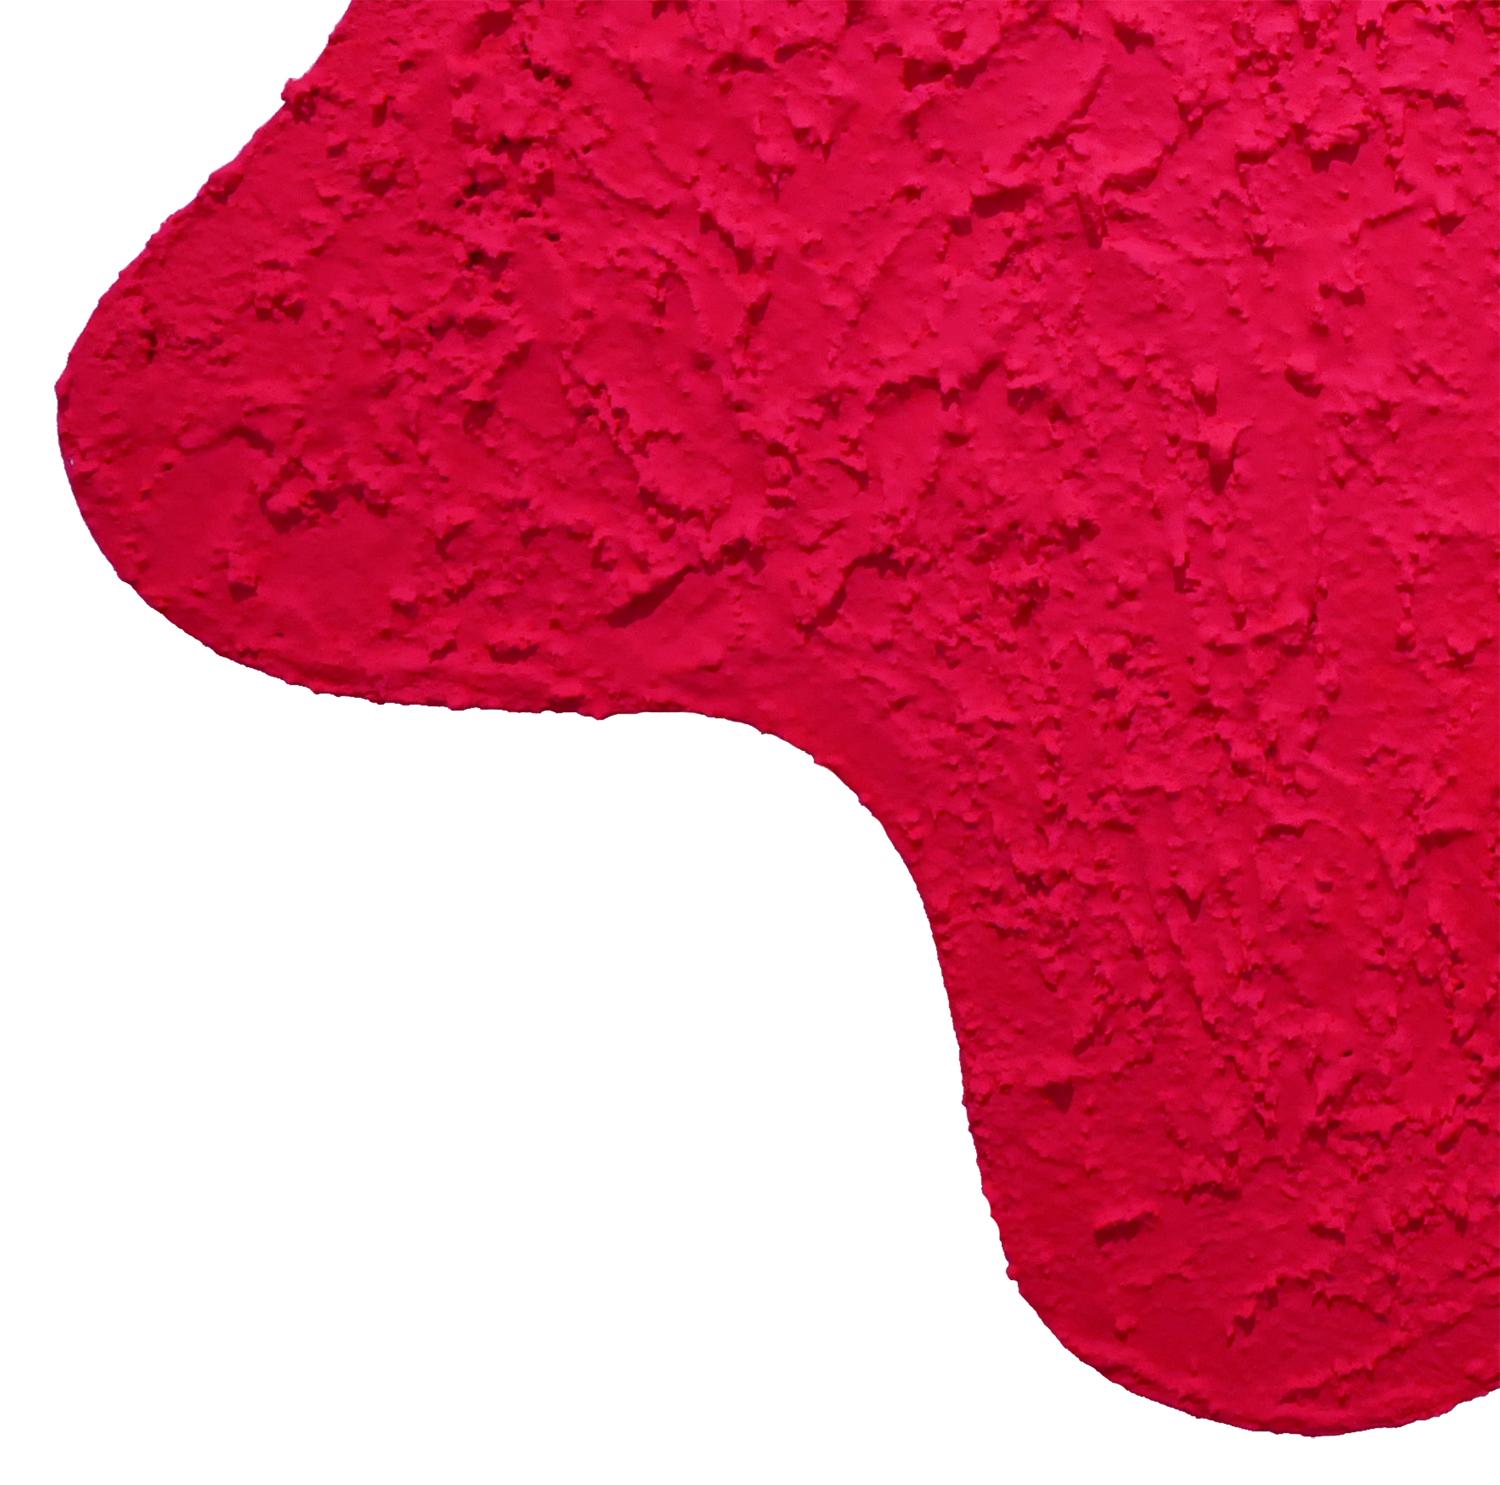 Abstract textured biomorphic shape painted with bright pink pigment by contemporary Houston, TX artist Matthew Reeves. The work is designed to hang away from the wall and cast a shadow around the piece. The dynamic texture combined with the